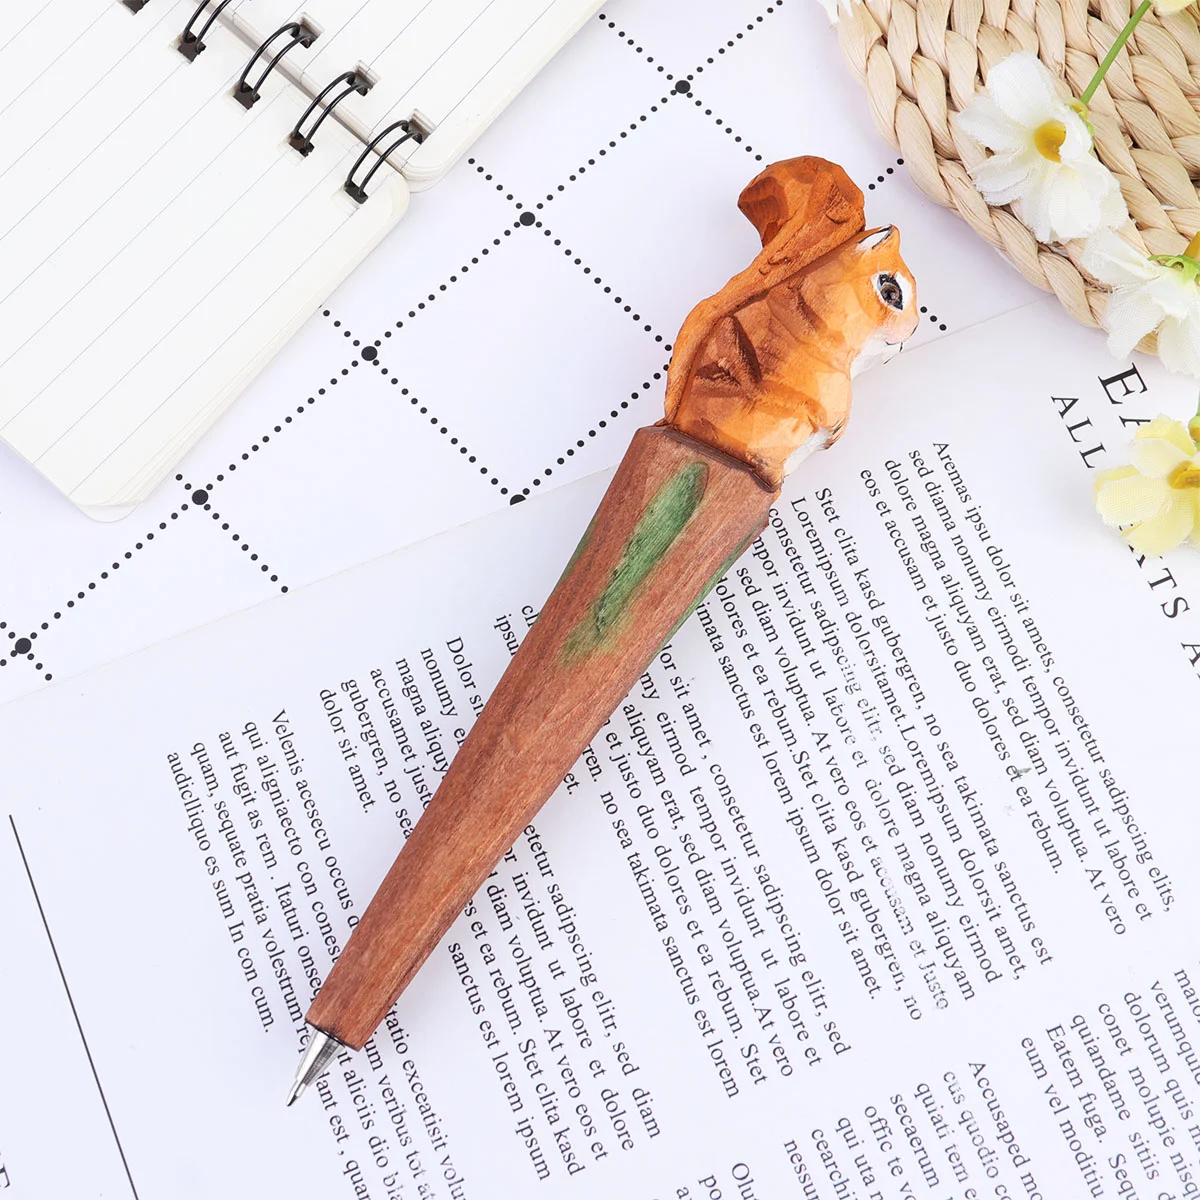 Pure Handmade Wood Carving Animal Pen Creative Wood Carving Squirrel Ballpoint Pen Replaceable Refill Gel Pen for Students wood handle replaceable grip dual purpose practical kitchen supply replacement